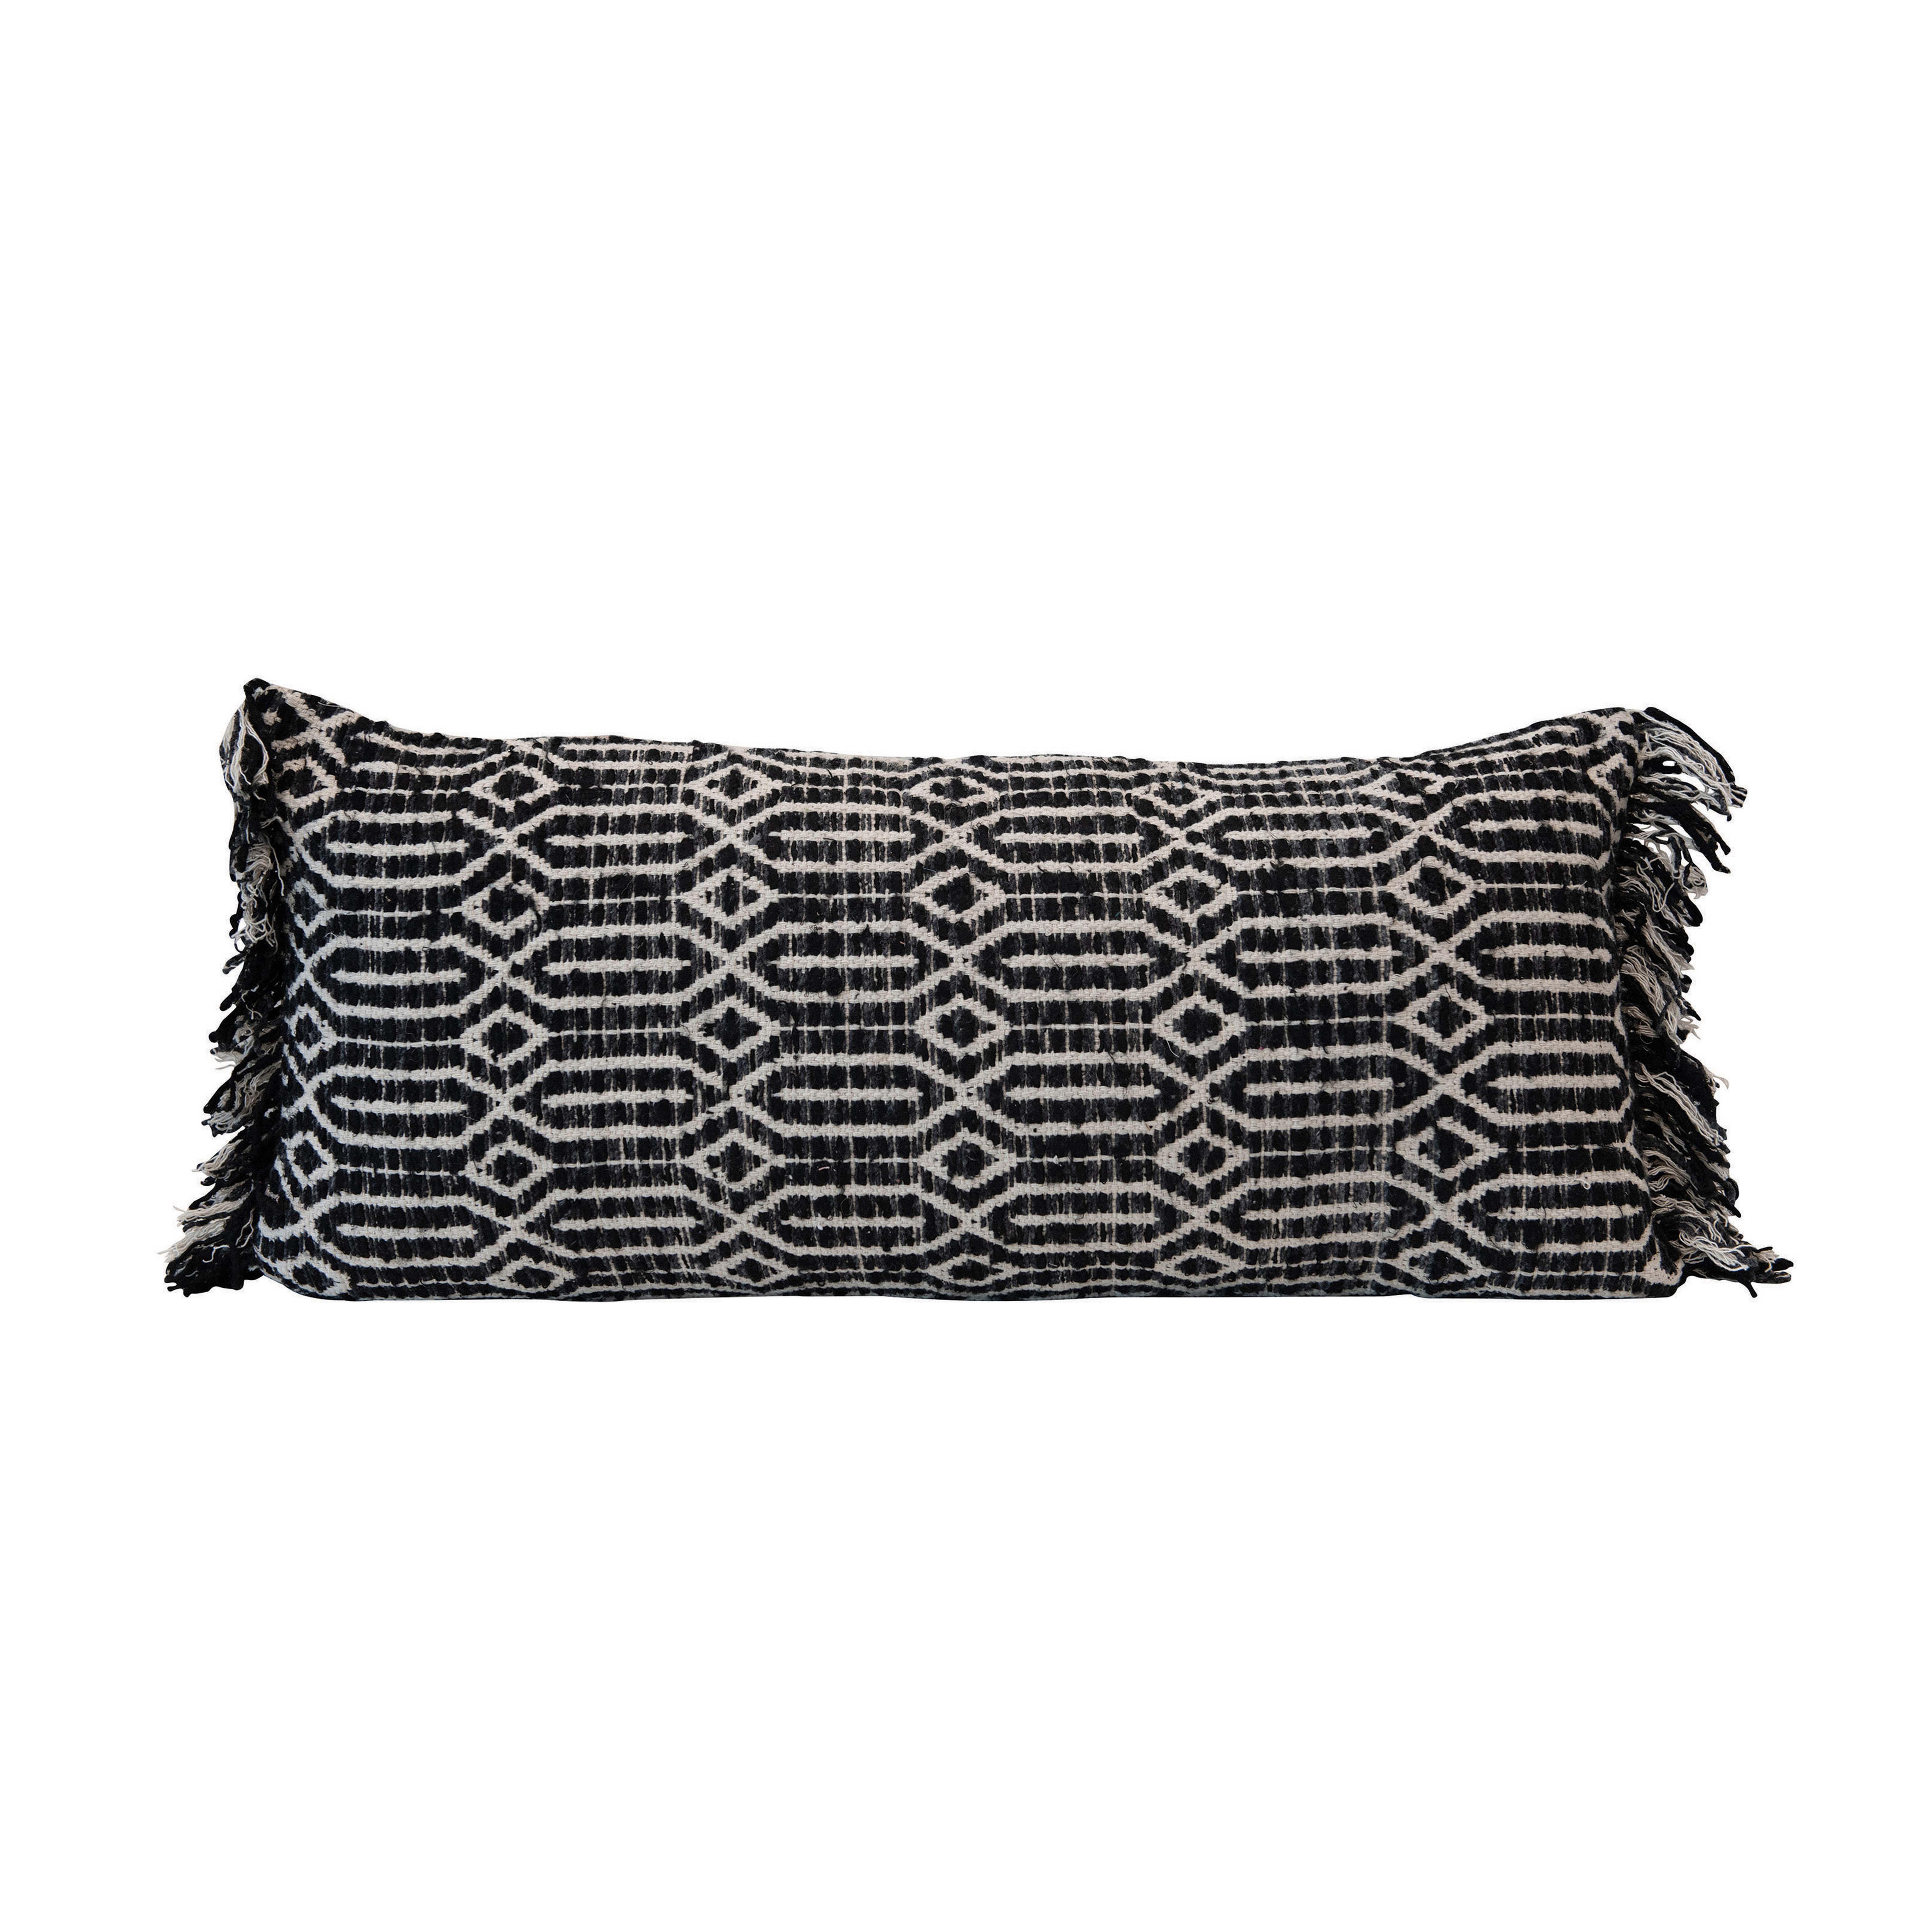 Woven Cotton Lumbar Pillow with Abstract Pattern, Black & White - Moss & Wilder